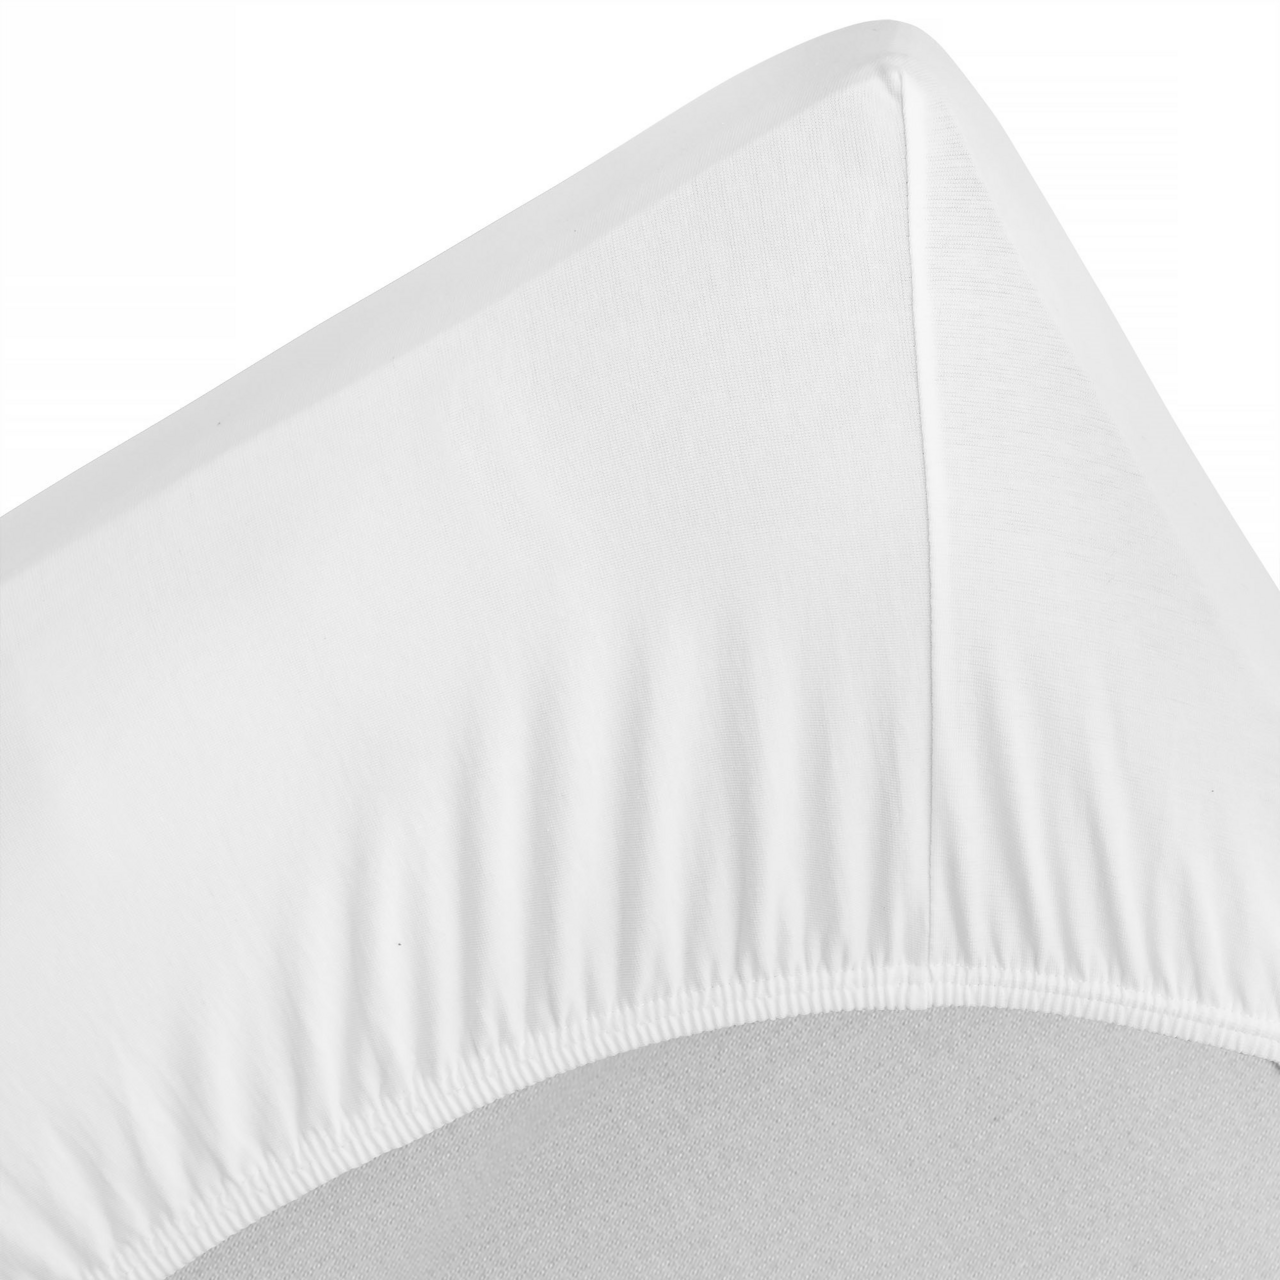 Mattress cover, fitted sheet 160x200 cm white